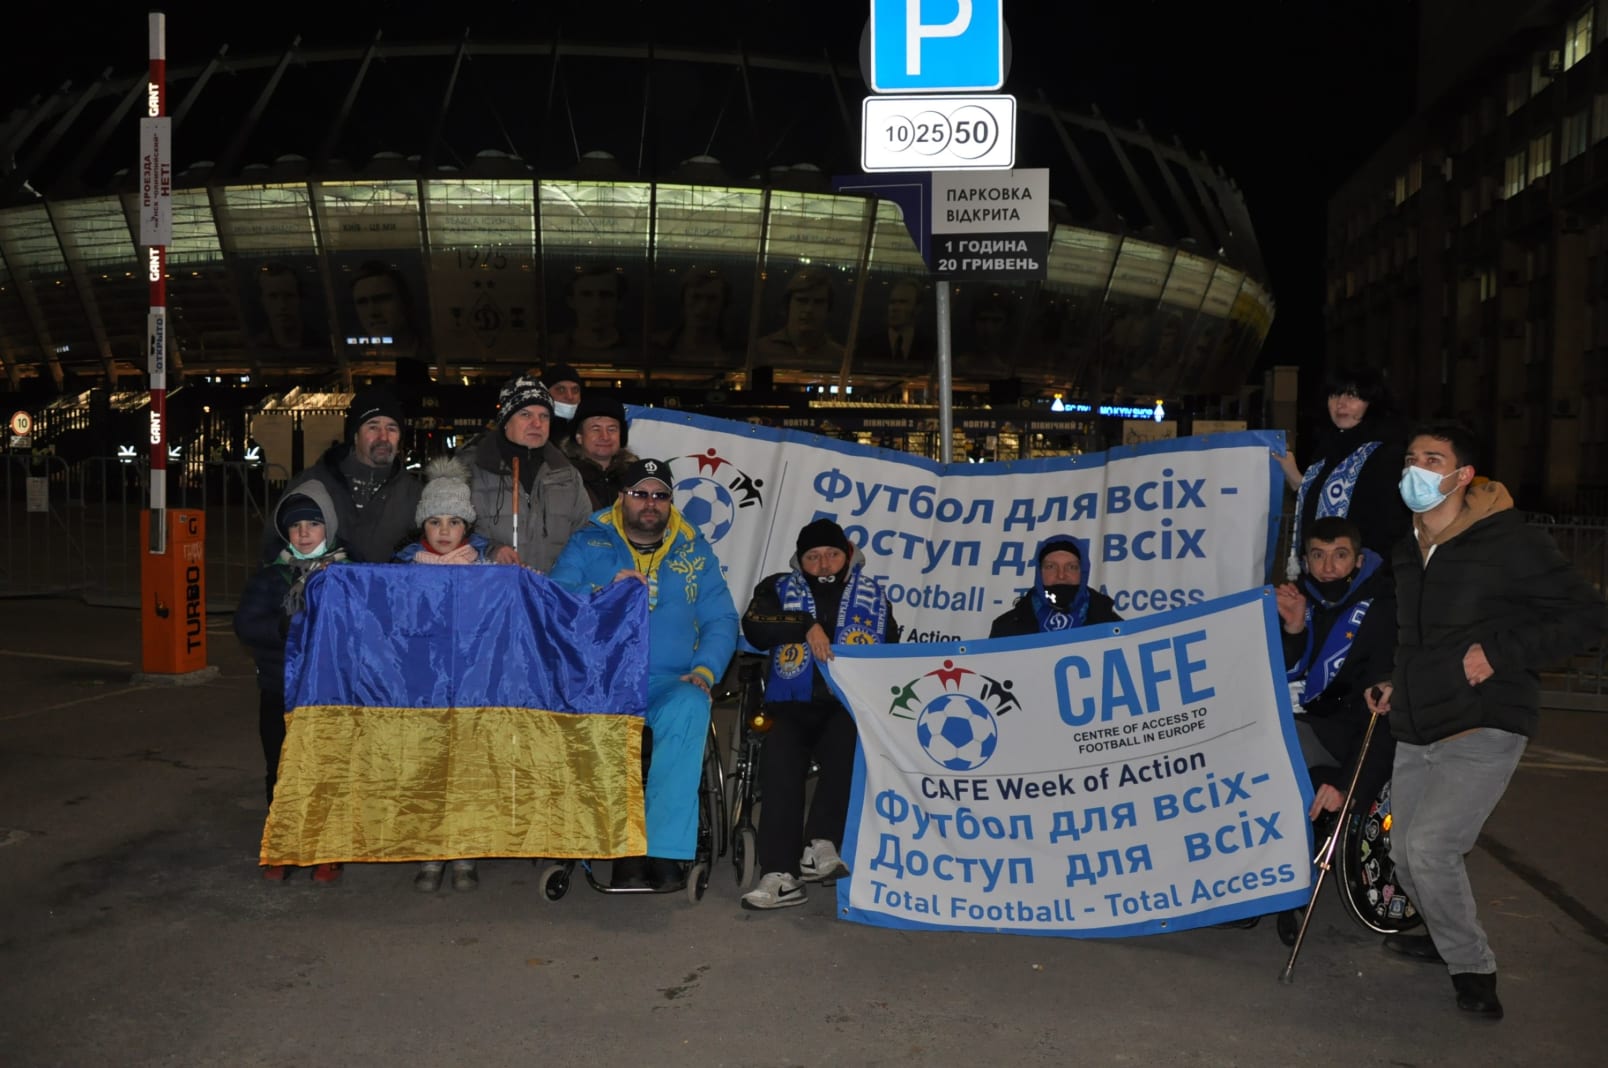 A group of disabled ukrainian fans outside the stadium in Kiev holding up a CAFE Week of Action banner alongside a Ukrainian flag.